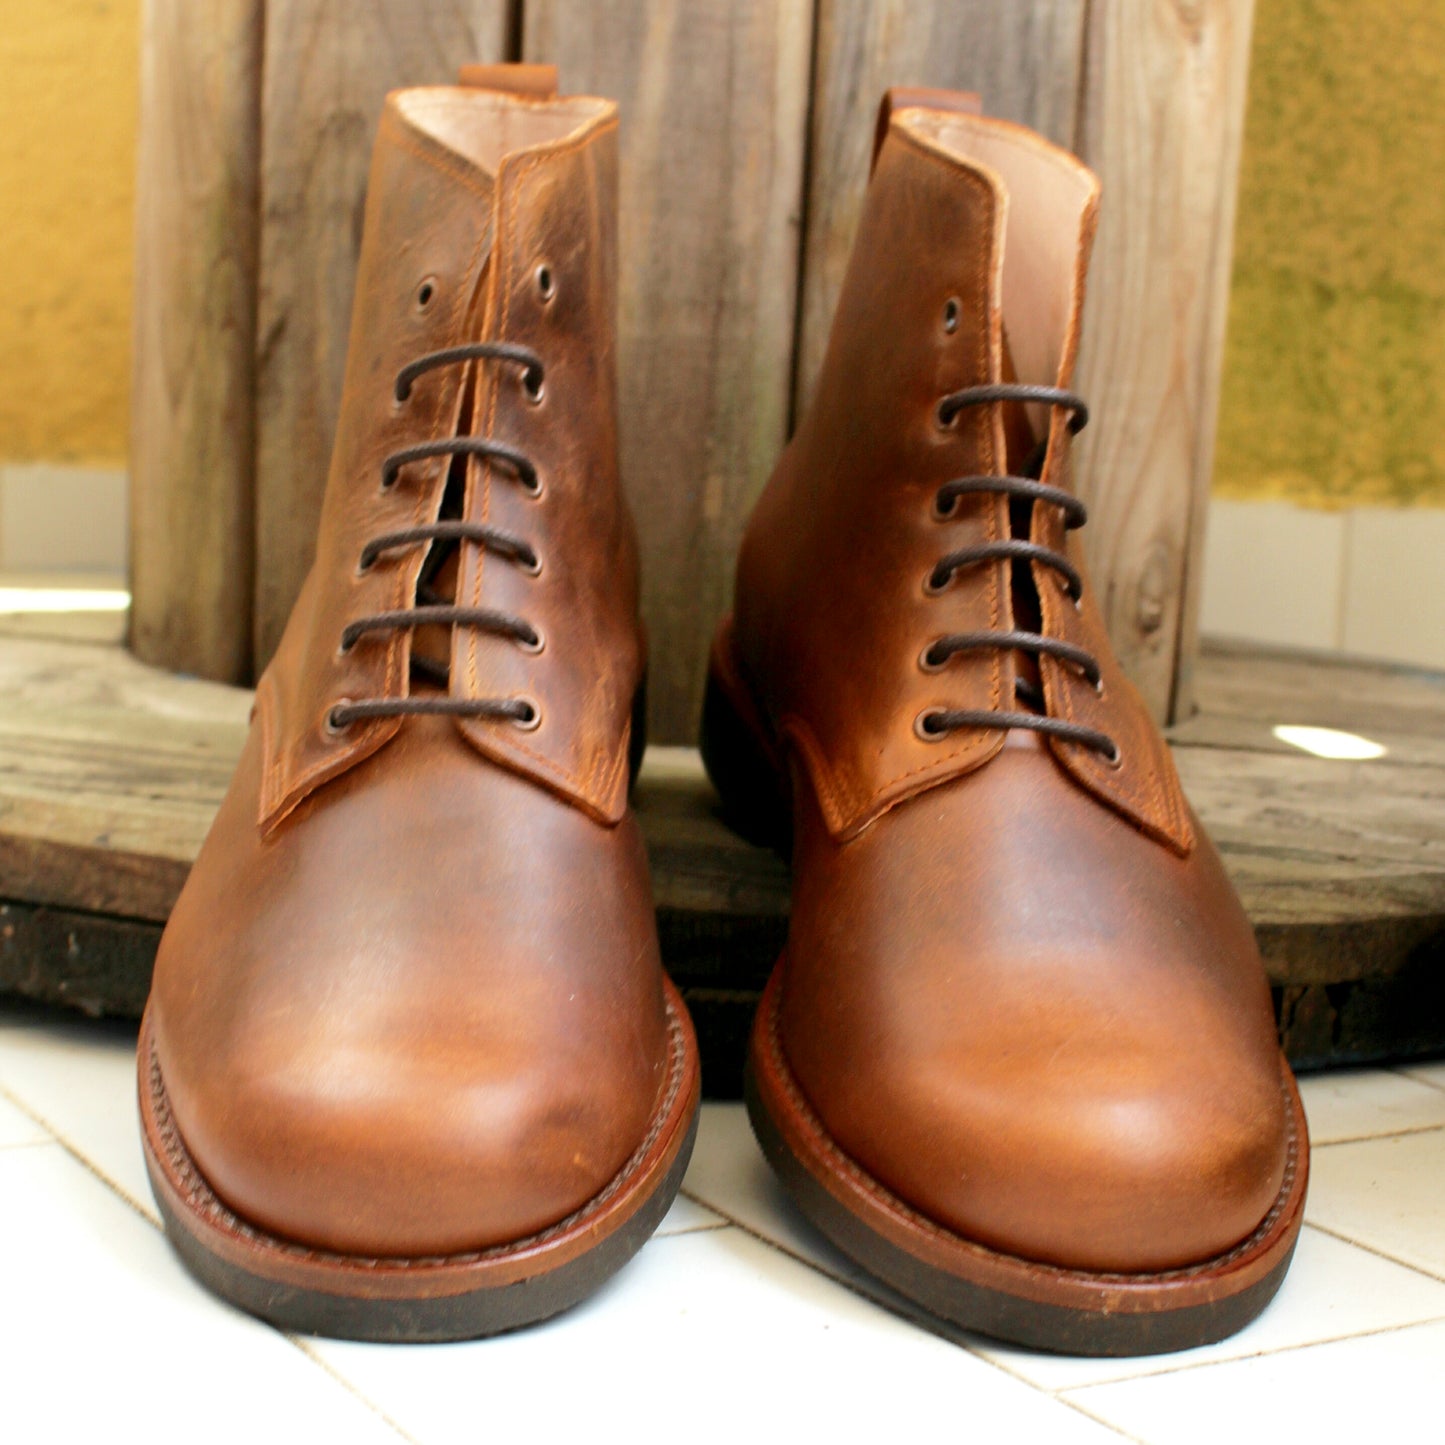 Vouga Boots - OldMulla - Boots Store, Handmade By George